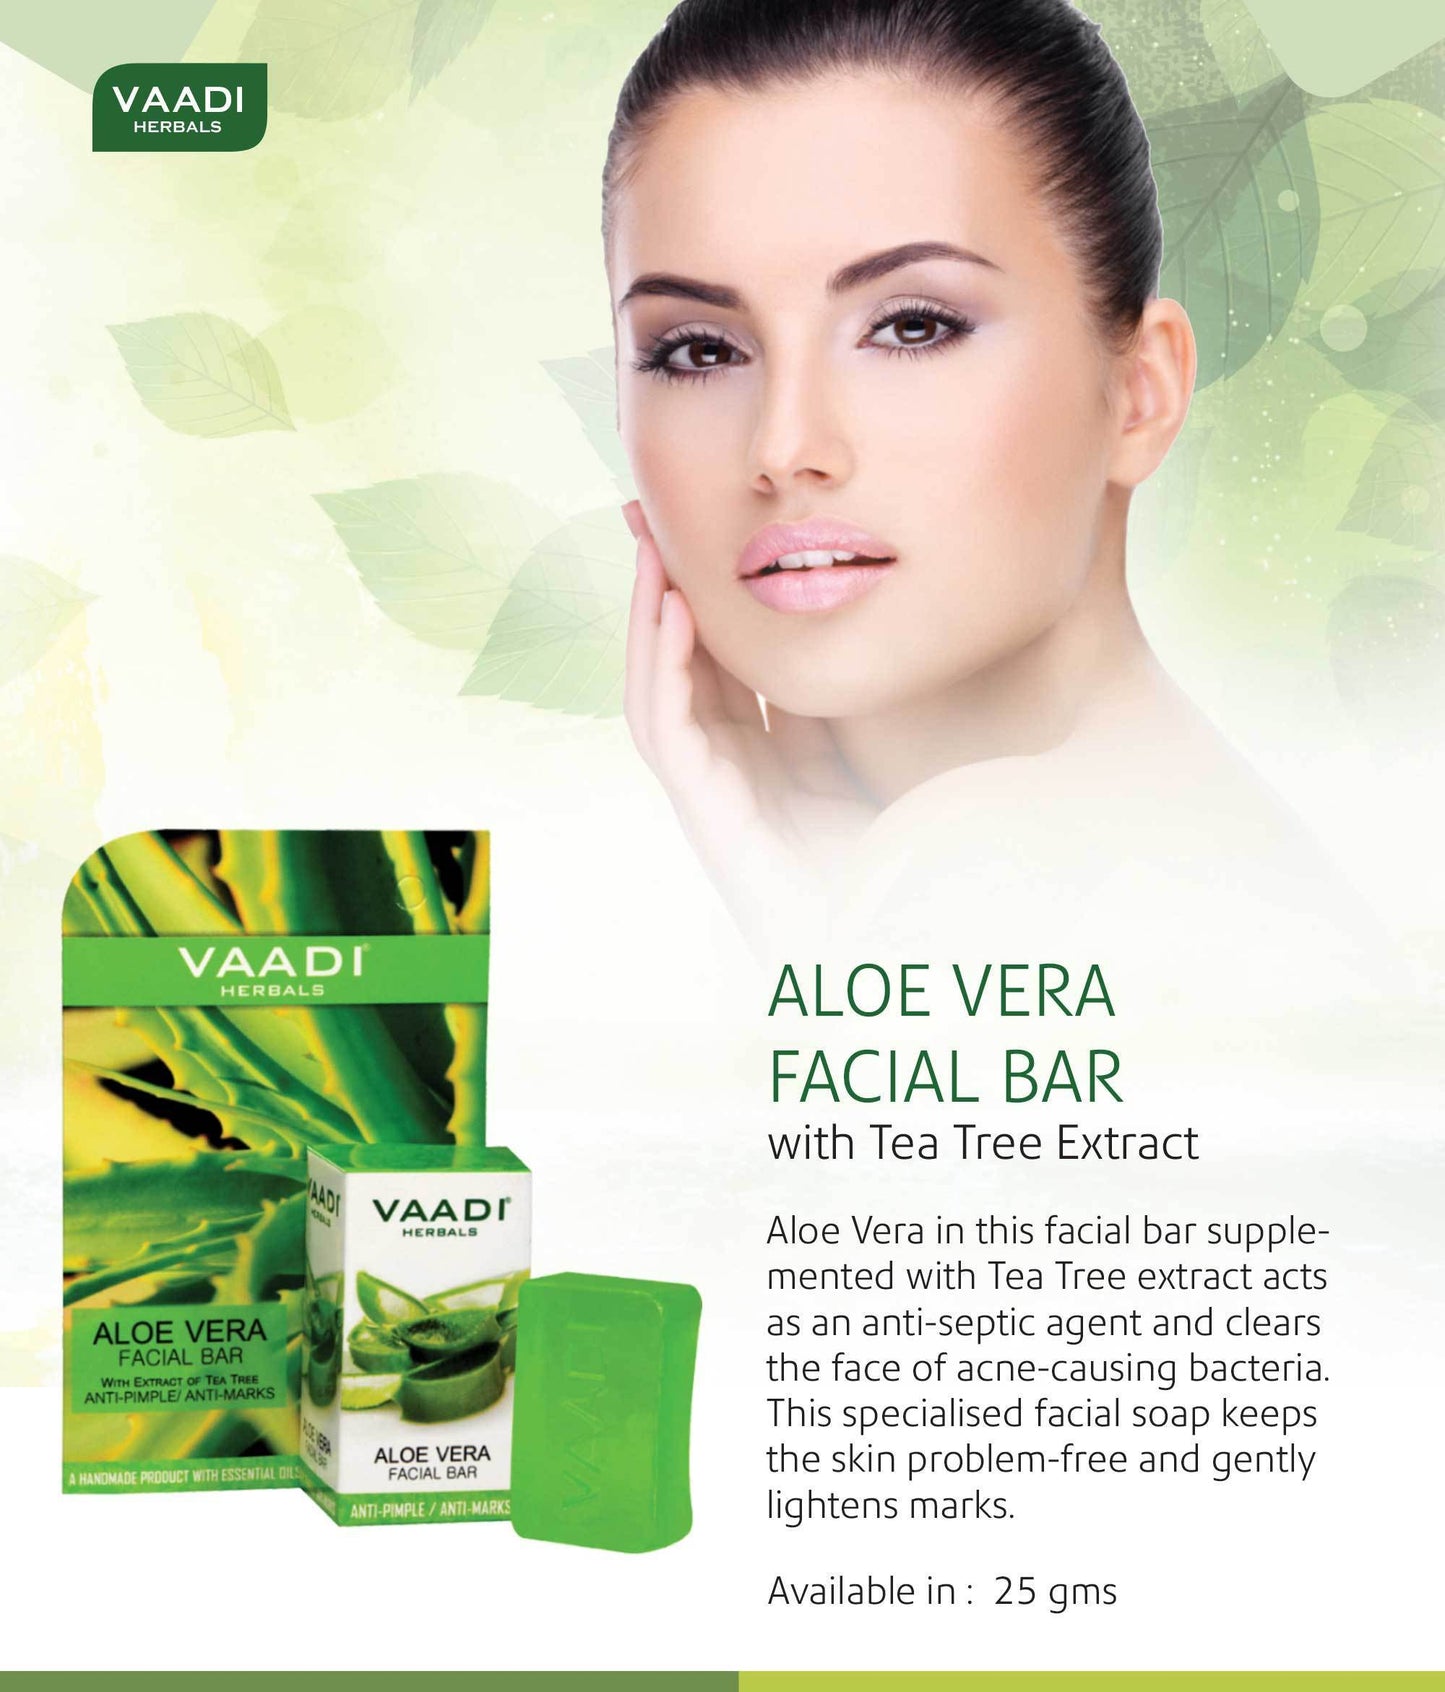 Organic Aloe Vera Facial Bar with Tea Tree and Honey - Reduces Acne - Keeps Skin Infection Free (6 x 25 gms/0.9 oz)